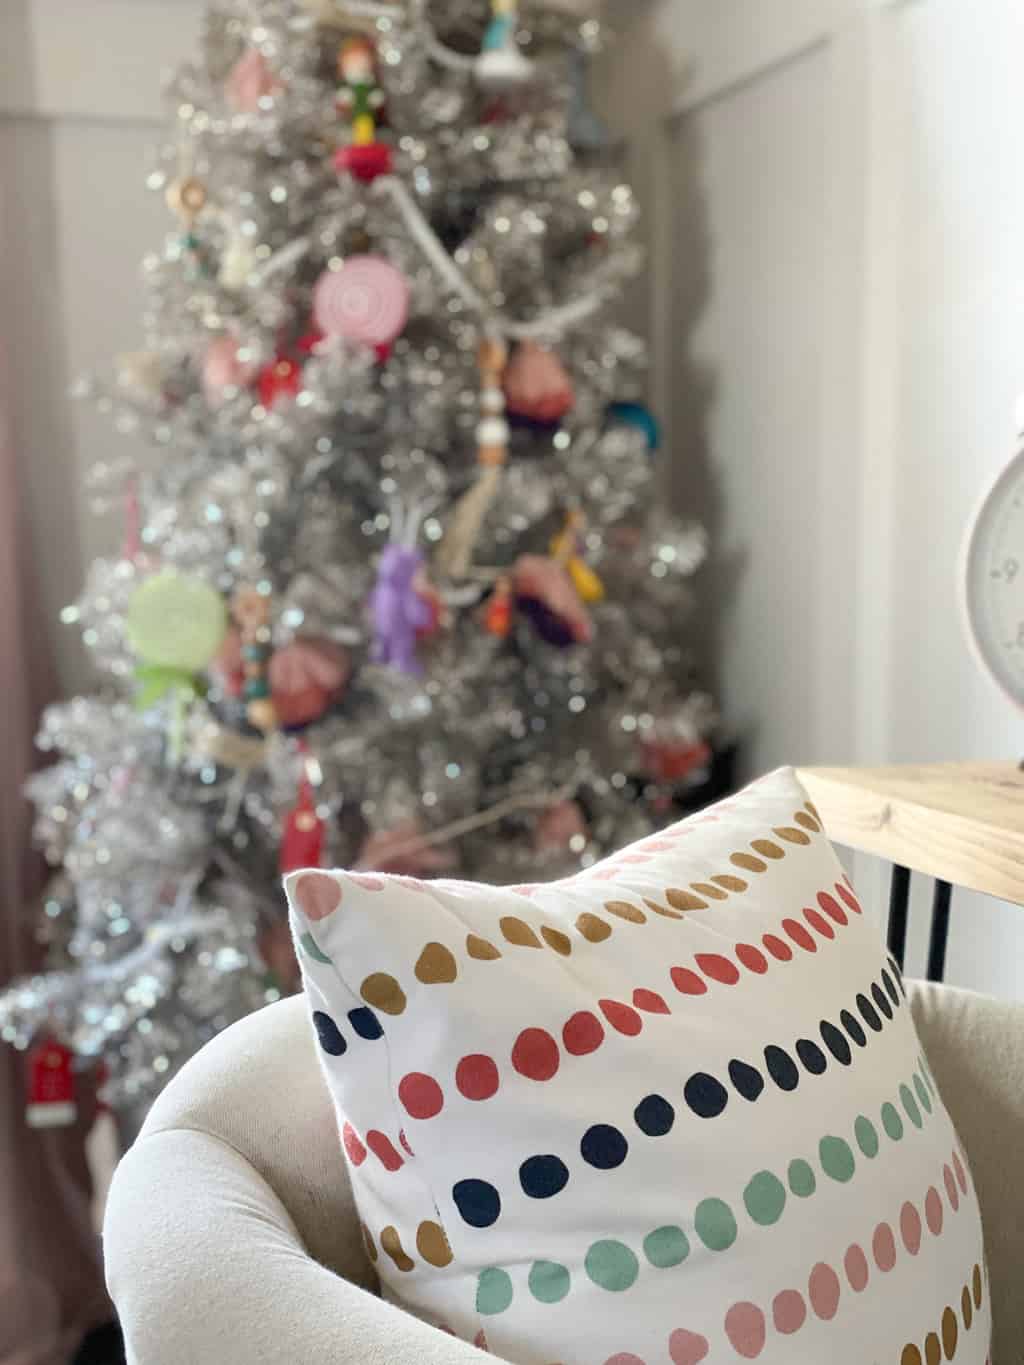 Decorating a girls room for the holidays is so much fun . This post shares simple Girls Bedroom Christmas Decor that will make the room sparkle and festive.